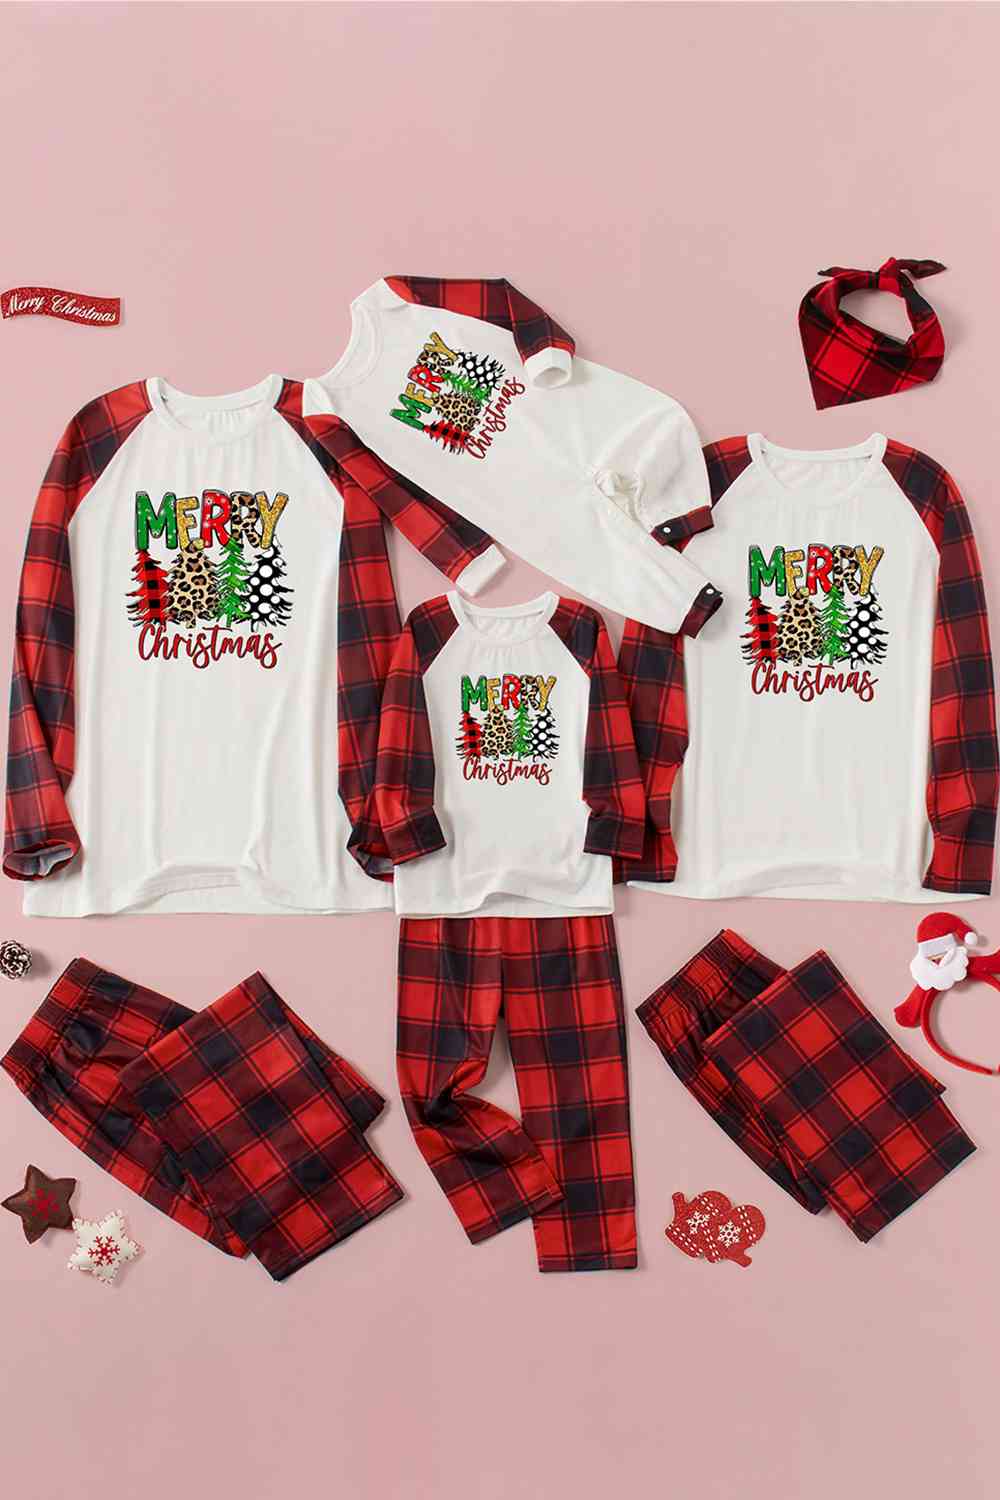 MERRY CHRISTMAS Graphic Top and Plaid Pants Set - Bottoms - Outfit Sets - 4 - 2024